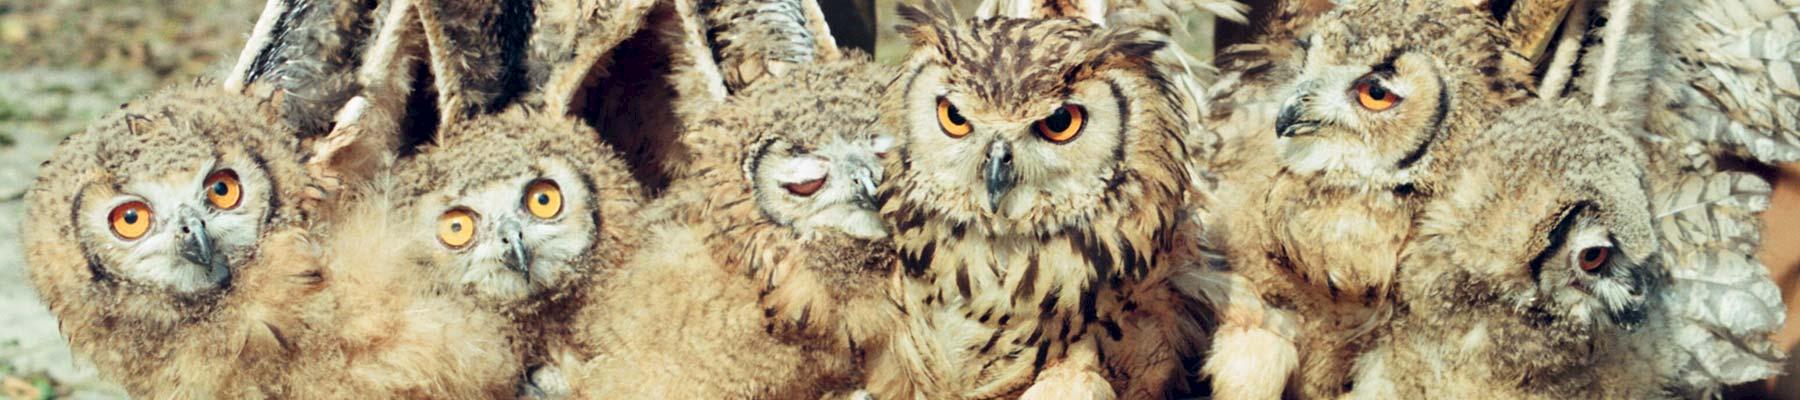 Rock Eagle-owls Bubo bengalensis for sale in an Indian market © Abrar Ahmed 